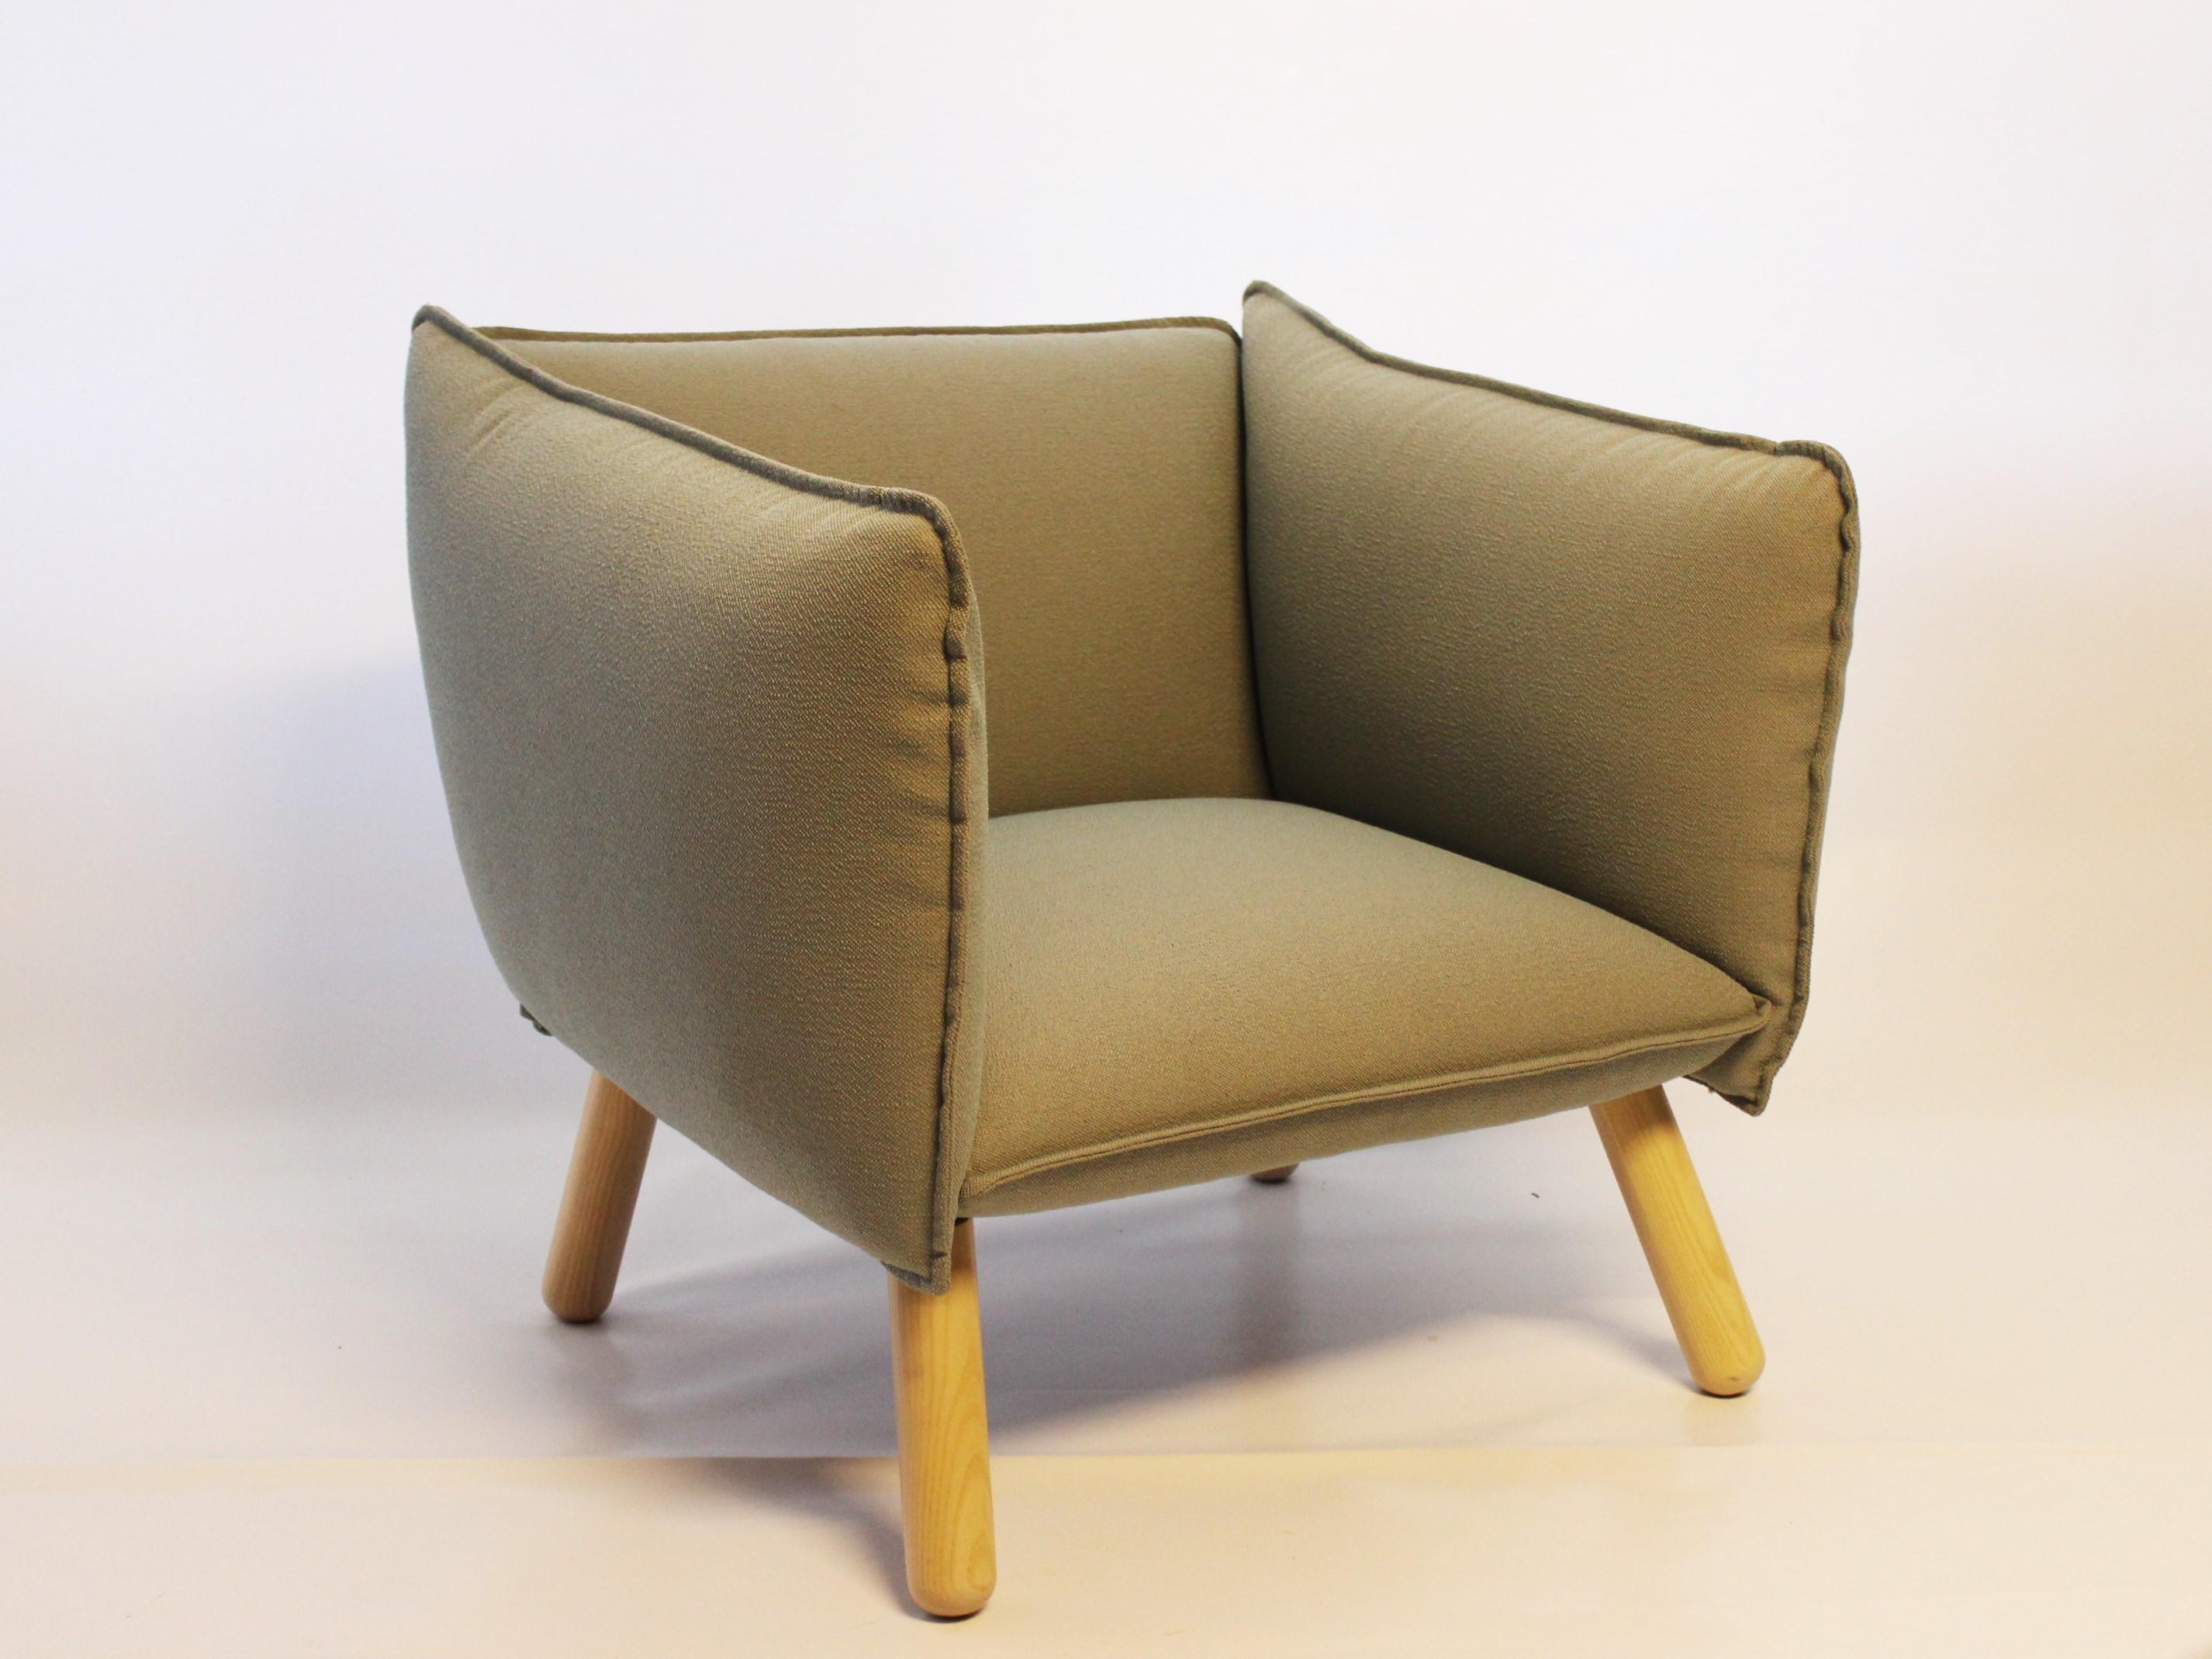 Dormi lounge chair upholstered with grey fabric and with legs of oak manufactured by the Swedish Ire Furniture. The chair is in great vintage condition.